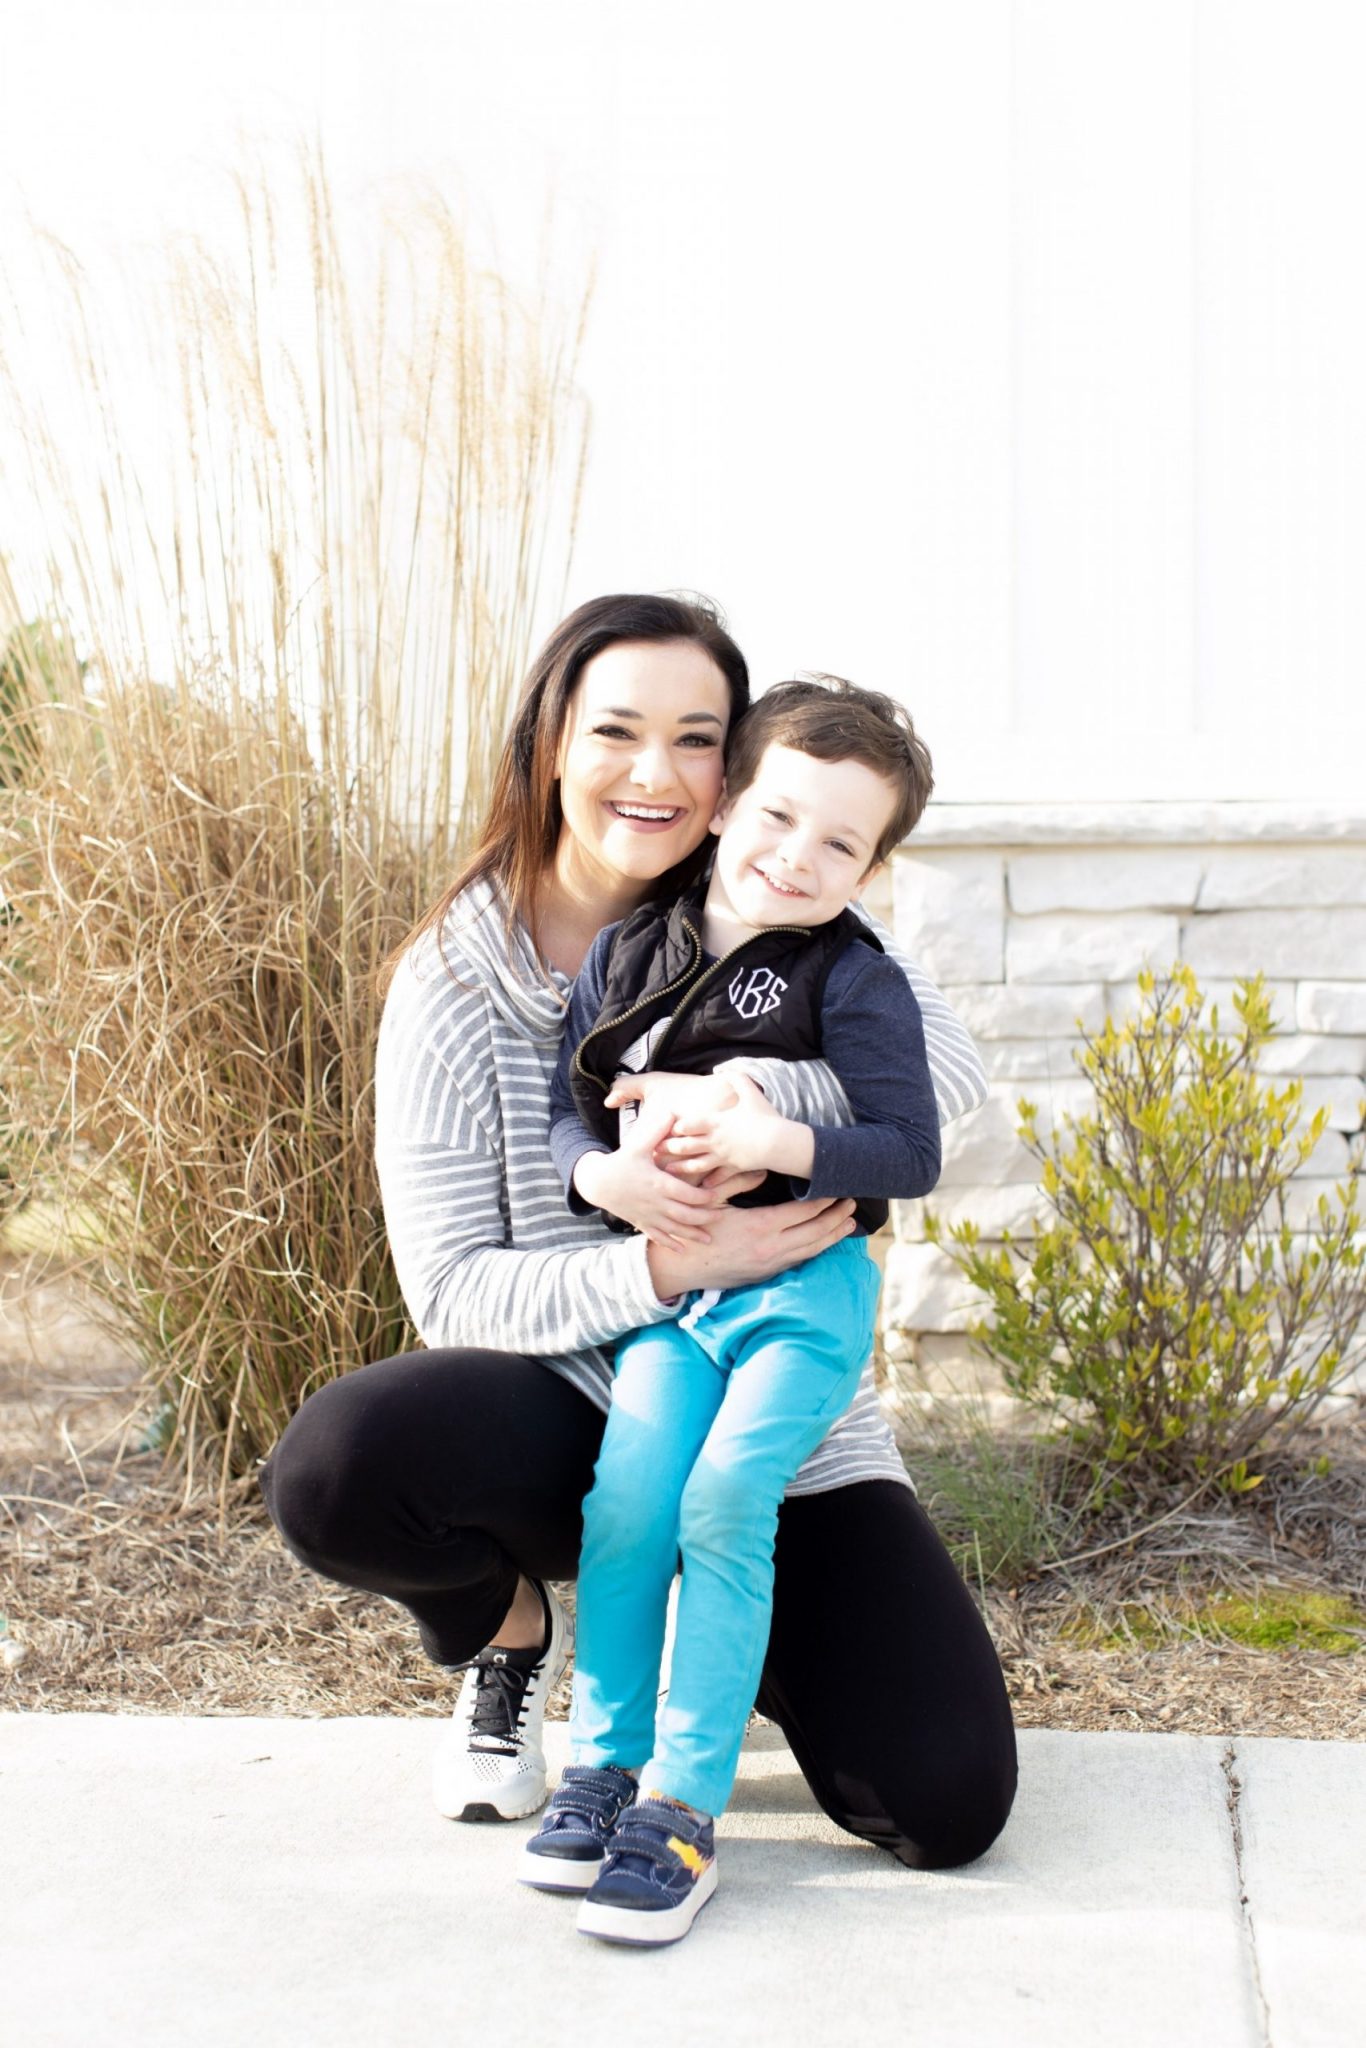 What I Want People to Know About Being a Boy Mom - Motherly